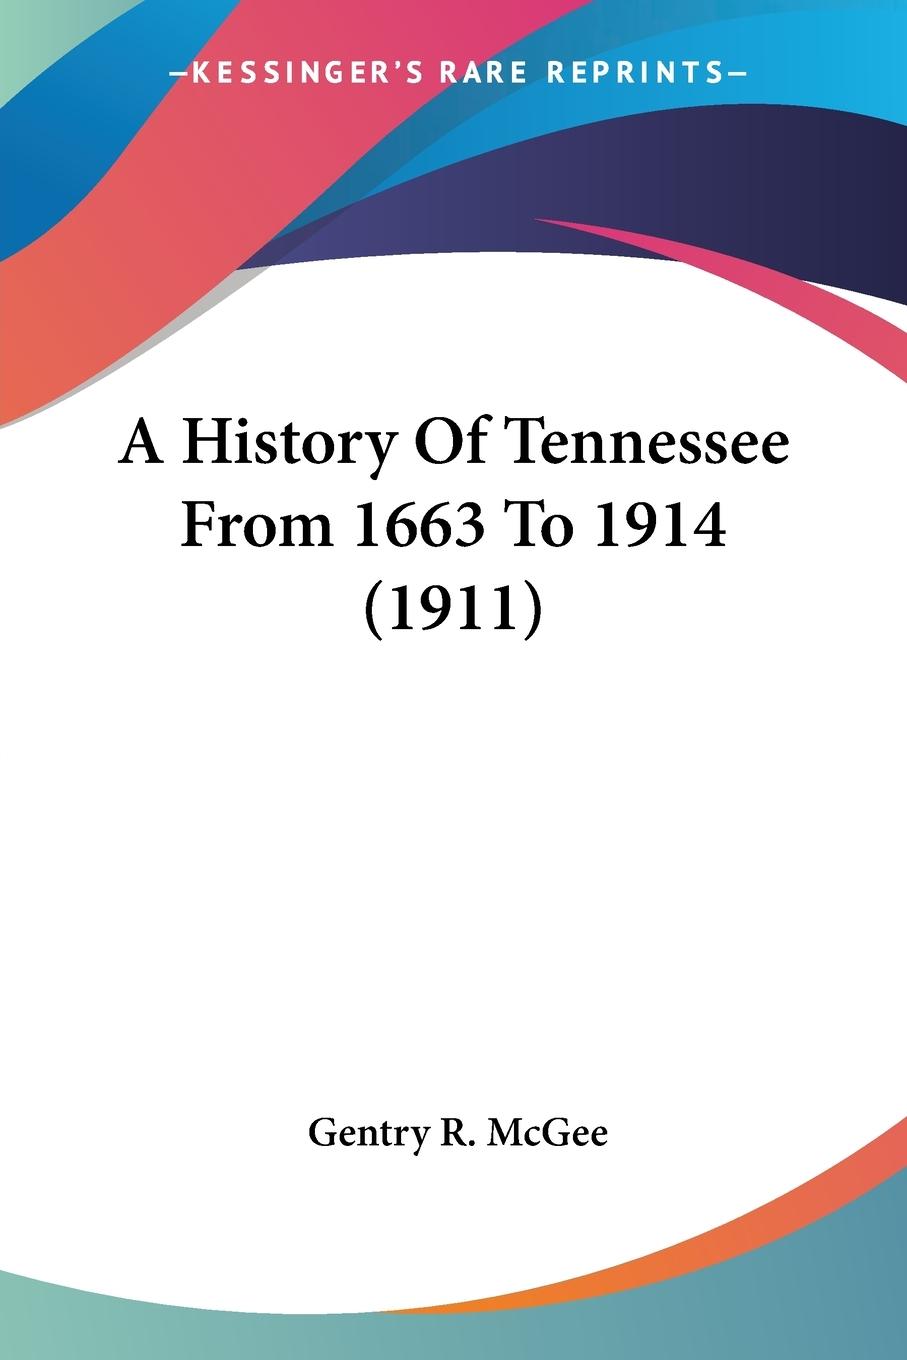 A History Of Tennessee From 1663 To 1914 (1911) - McGee, Gentry R.